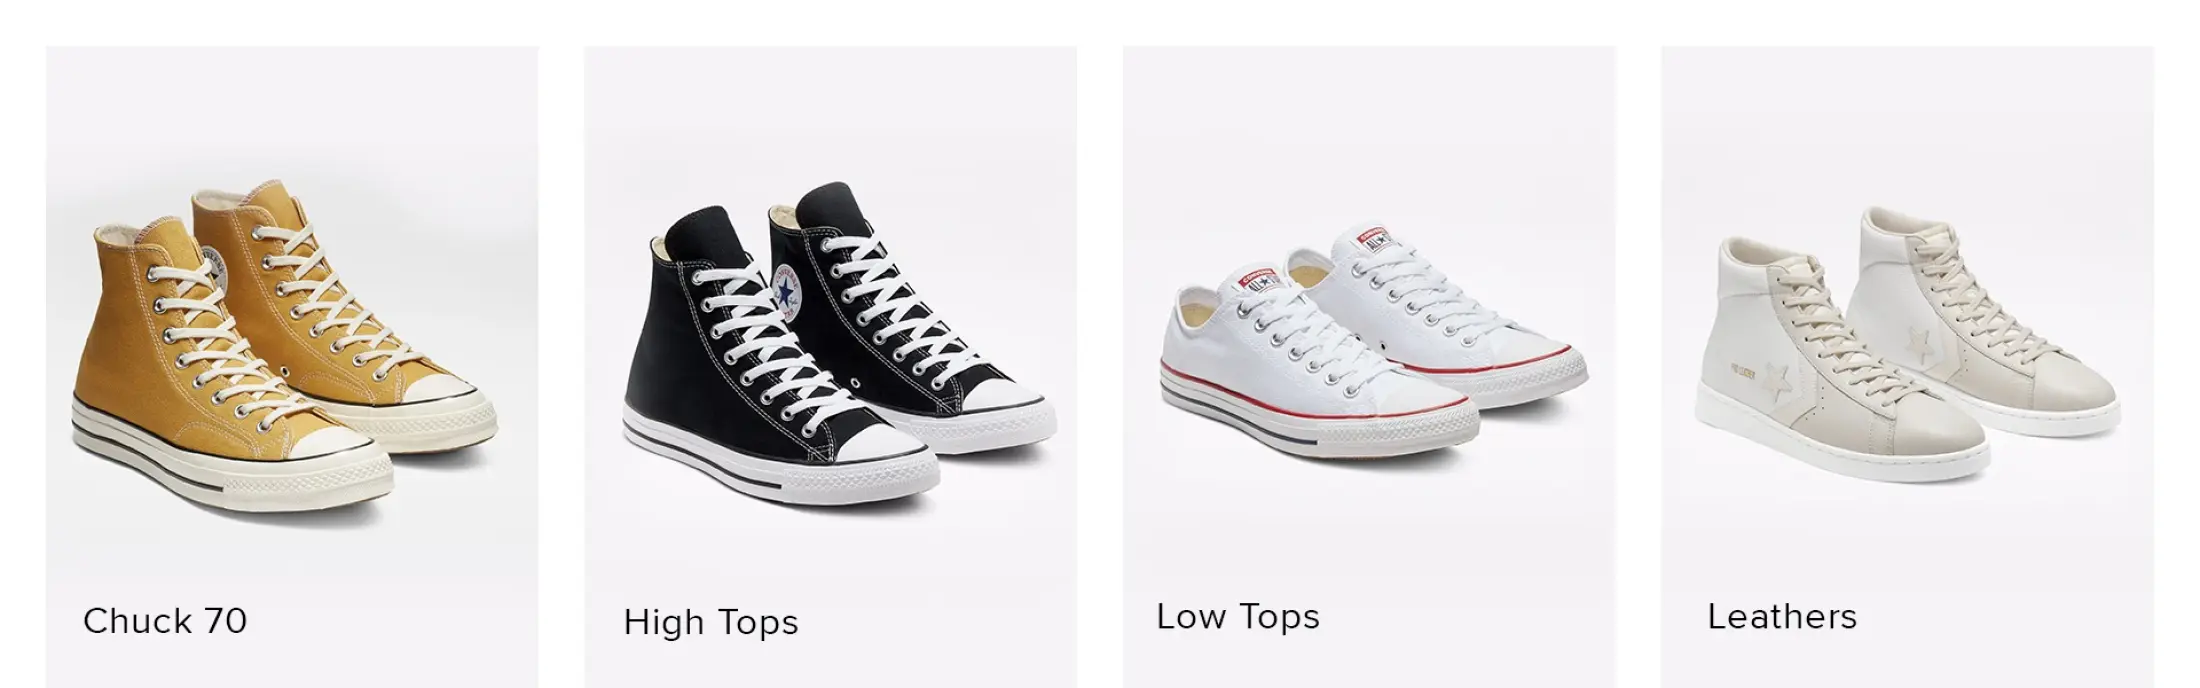 converse official store